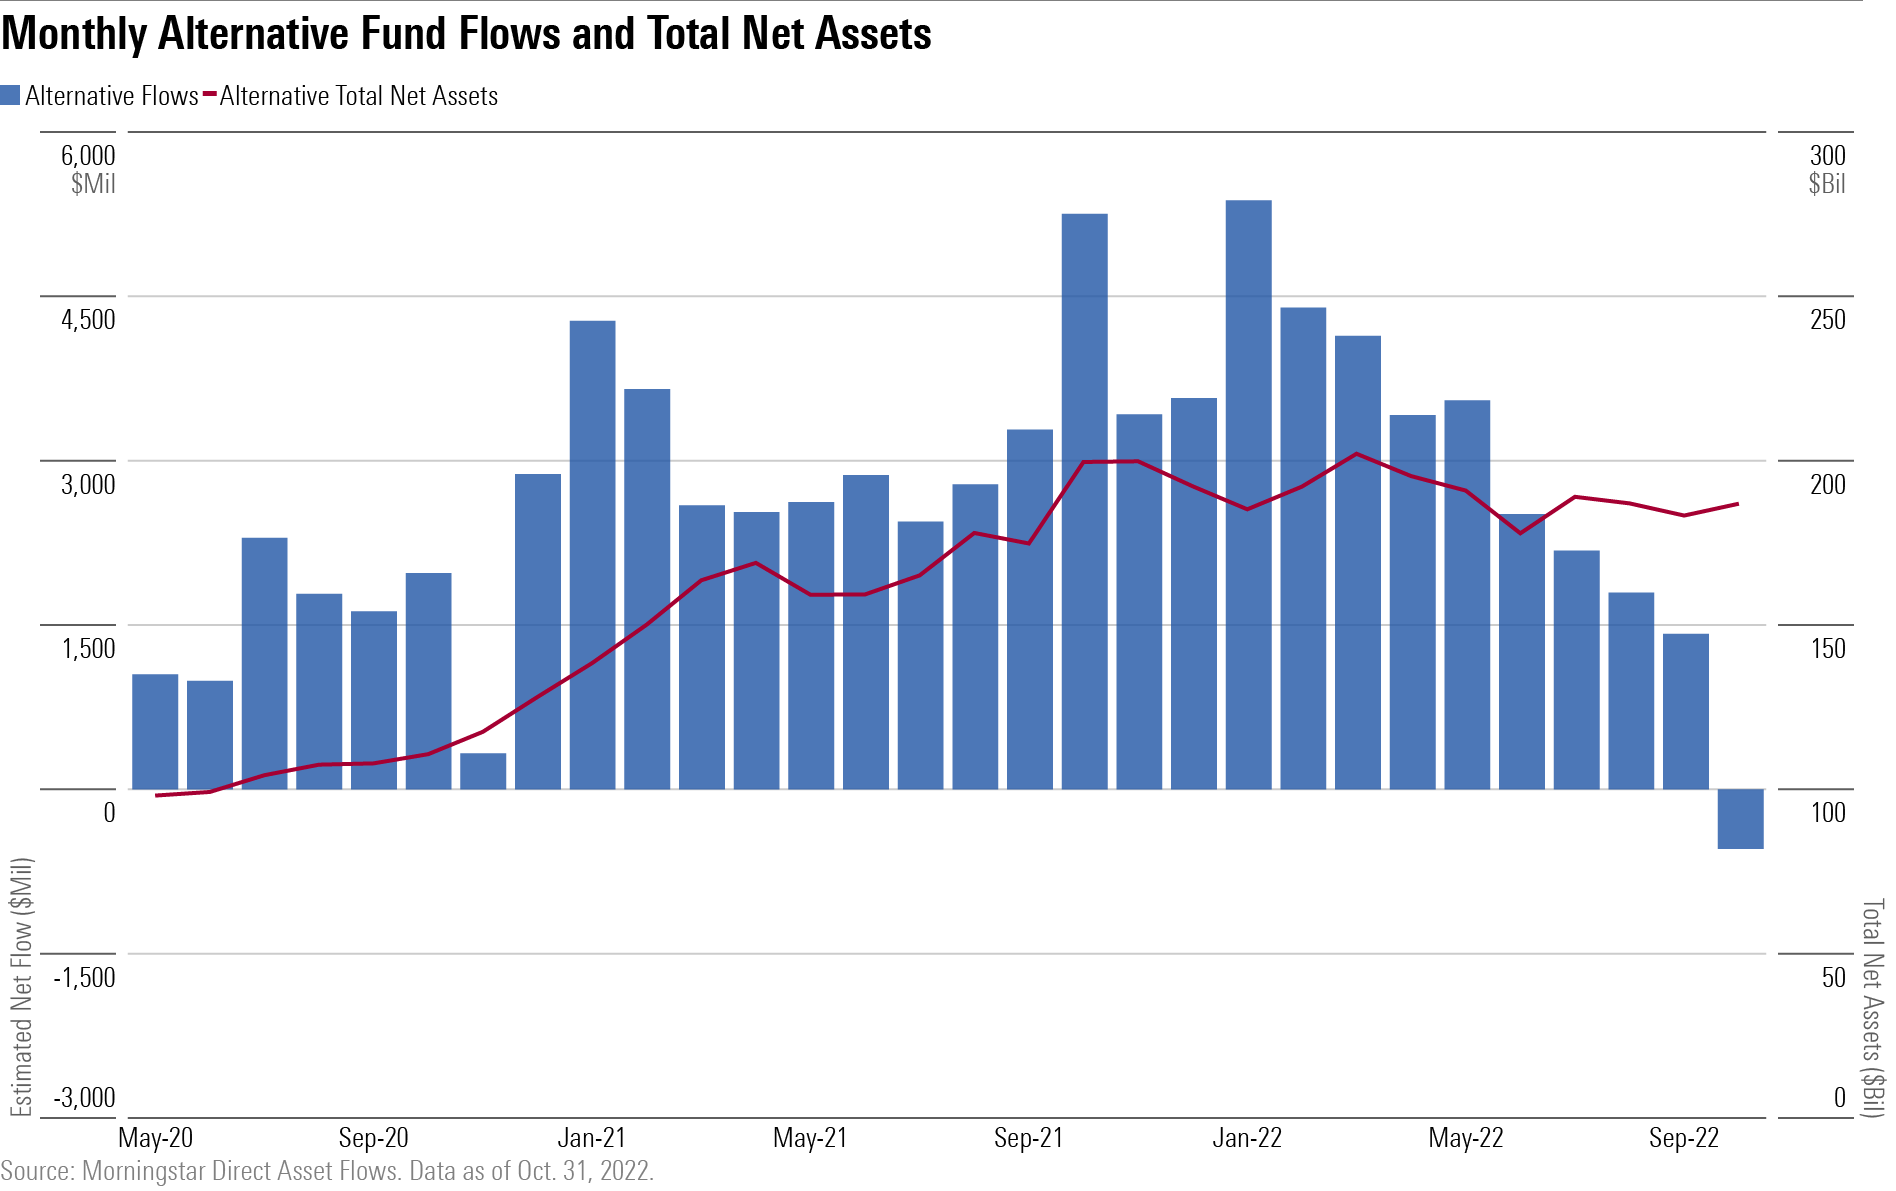 Alternative funds shed about $500 million in October, breaking their incredible 29-month streak of inflows.